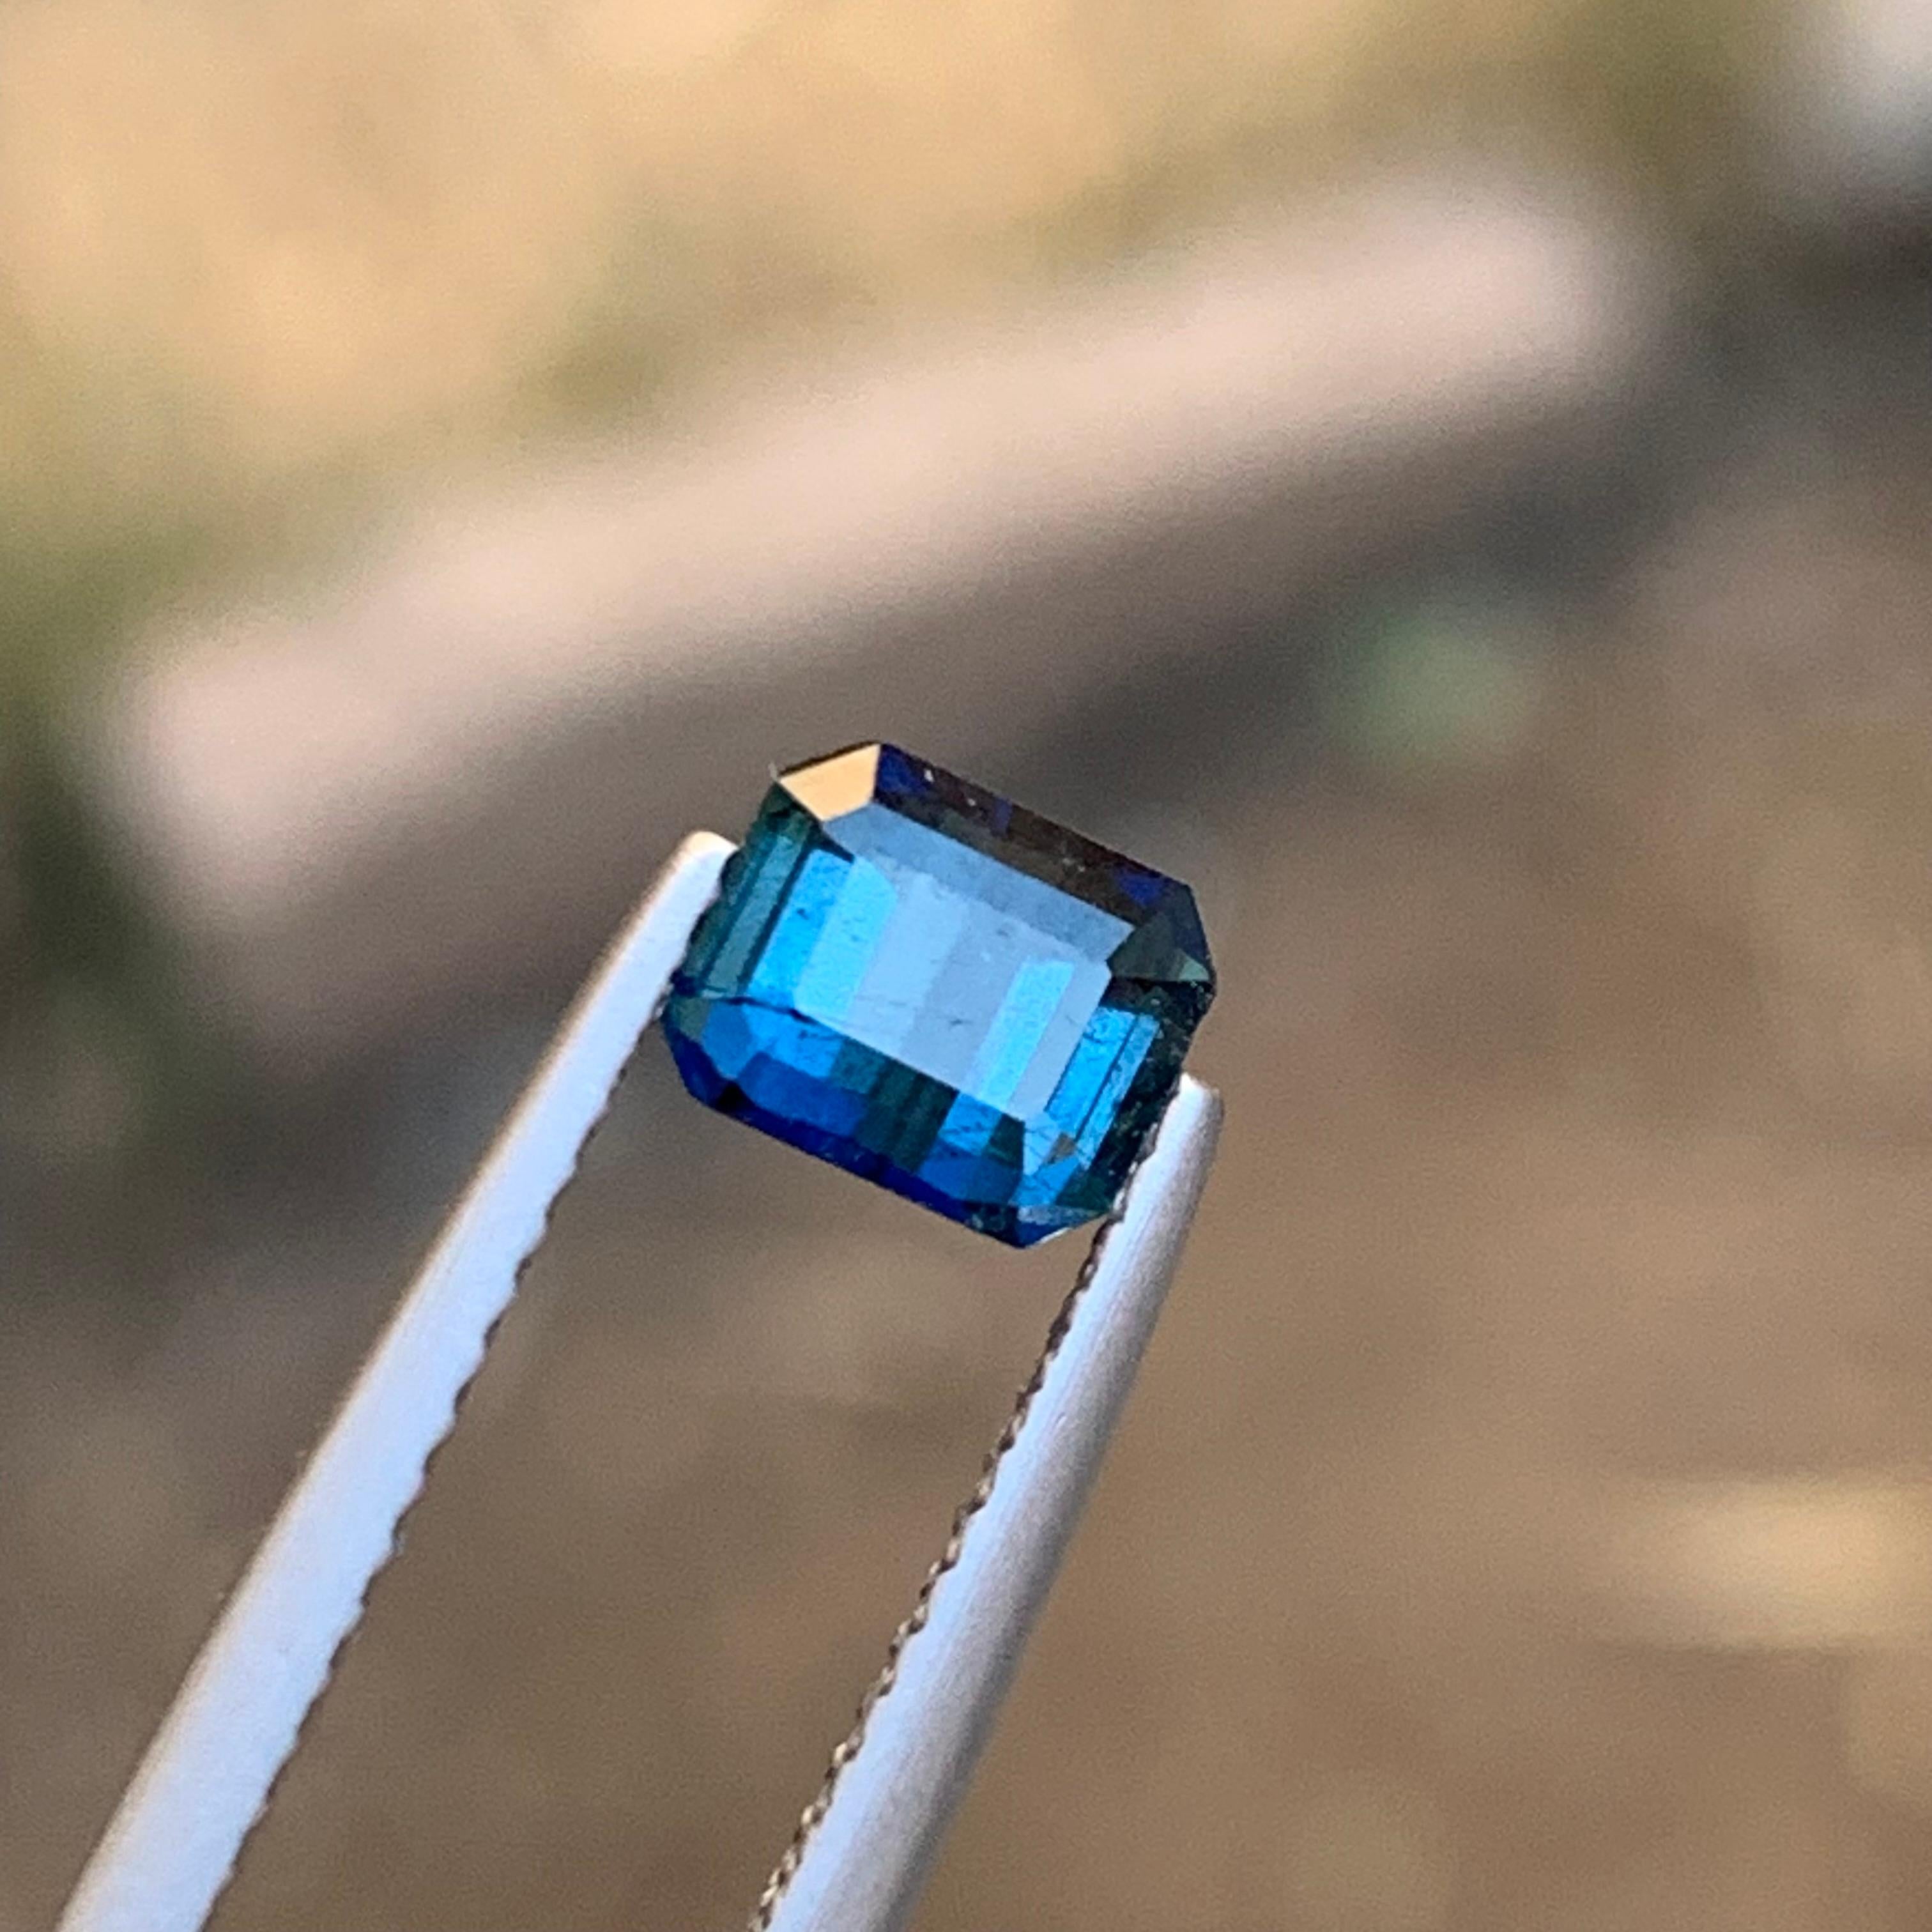 Rare Darkish Inky Blue Natural Tourmaline Gemstone, 1 Ct Emerald Cut for Ring  For Sale 3